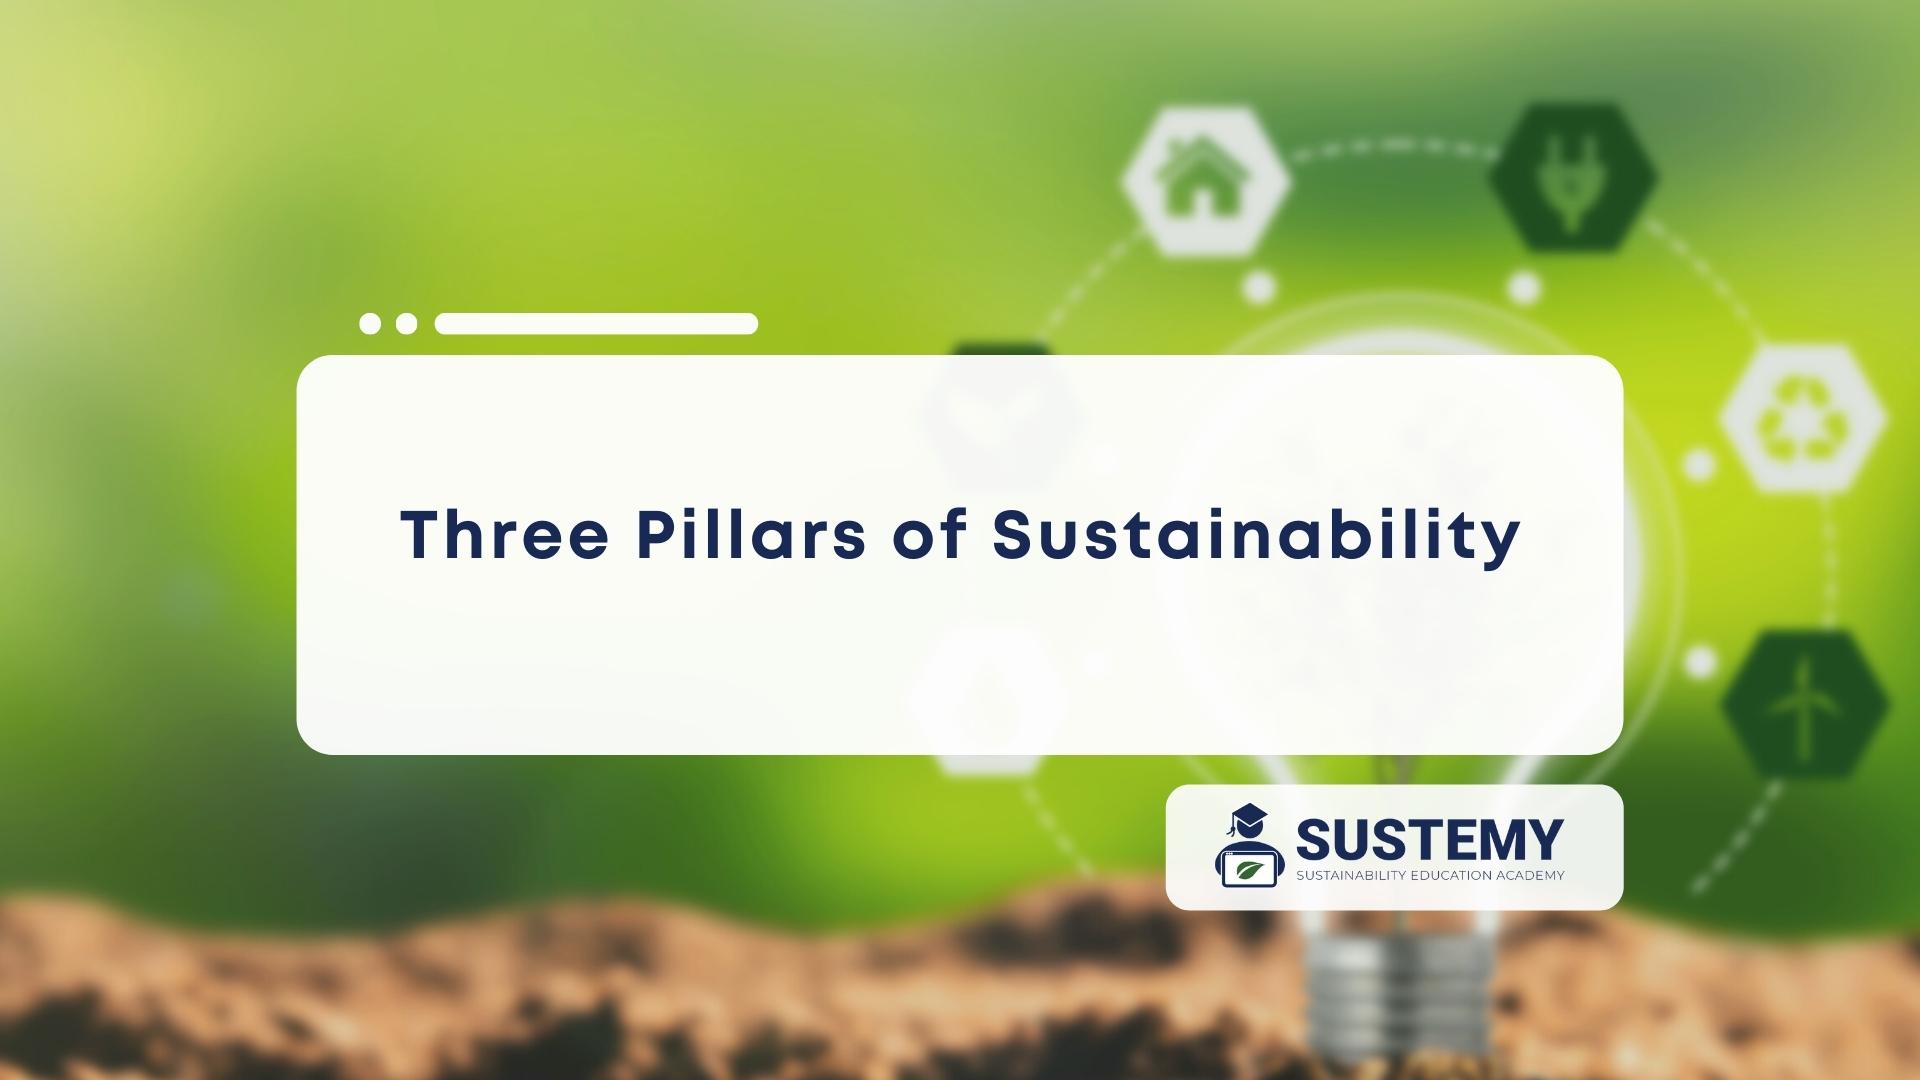 Featured Image of the three pillars of sustainability